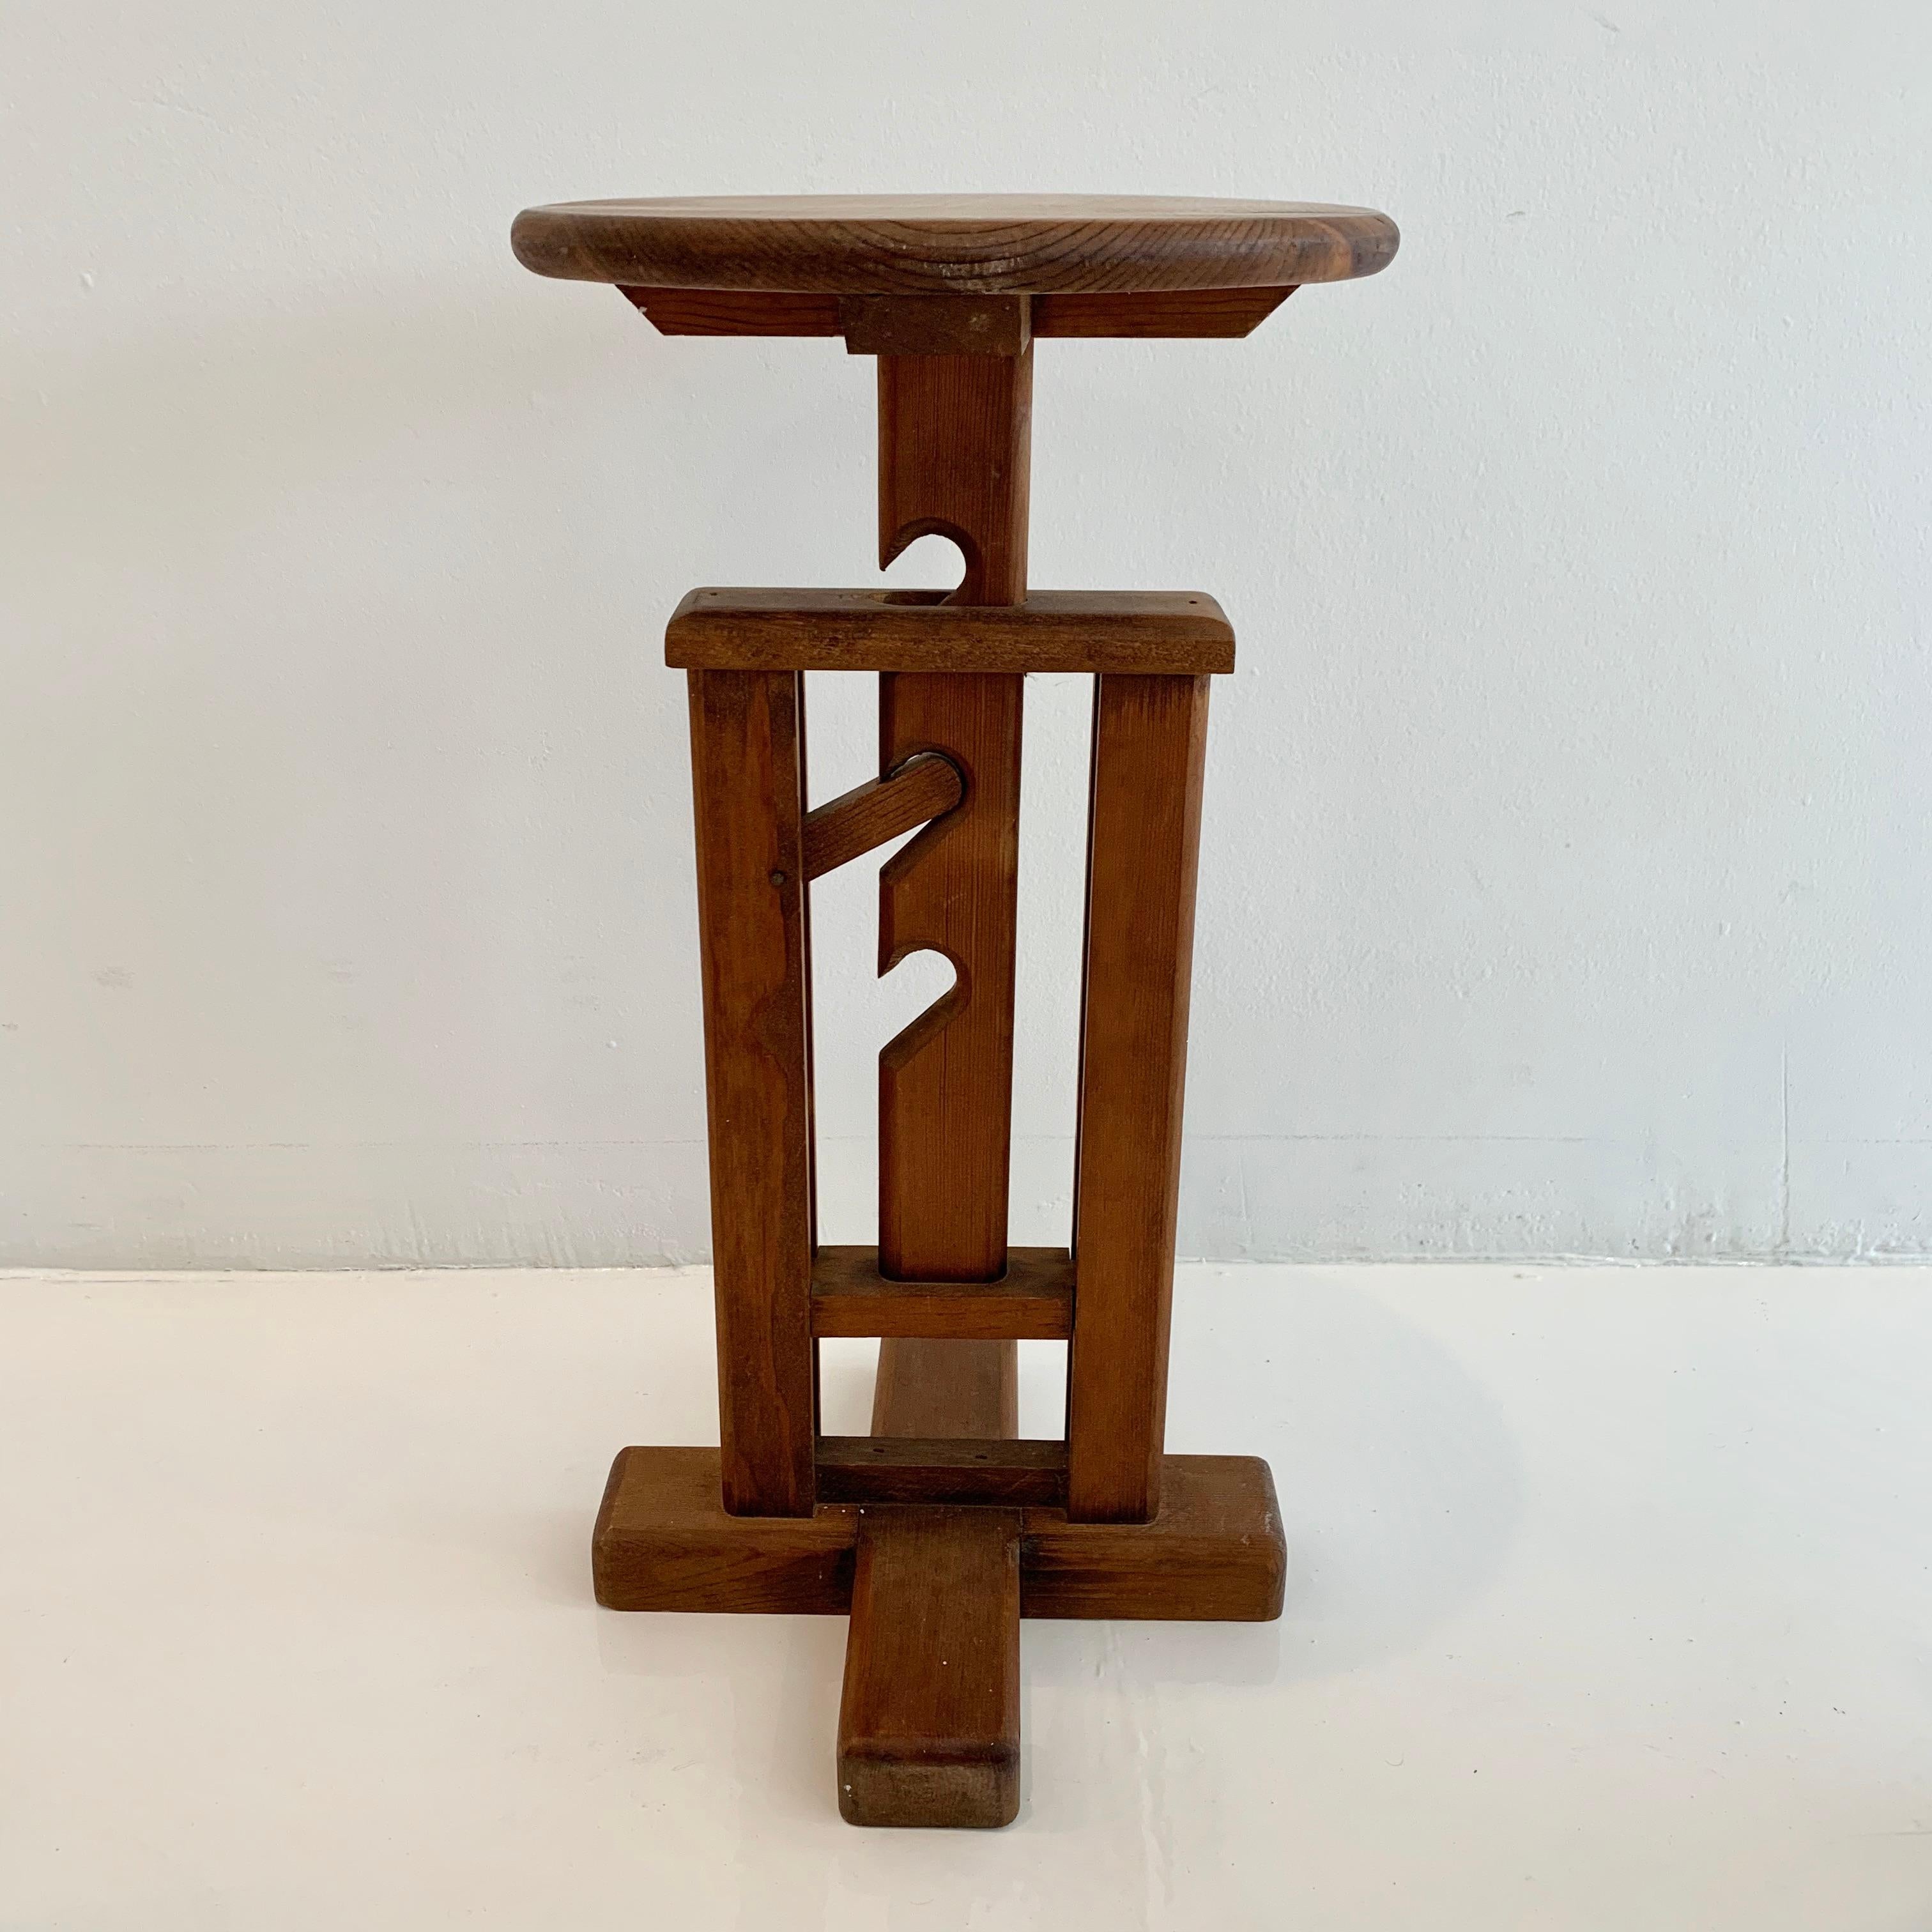 Very unusual wood farm stool. Stool can be adjusted in height from 18